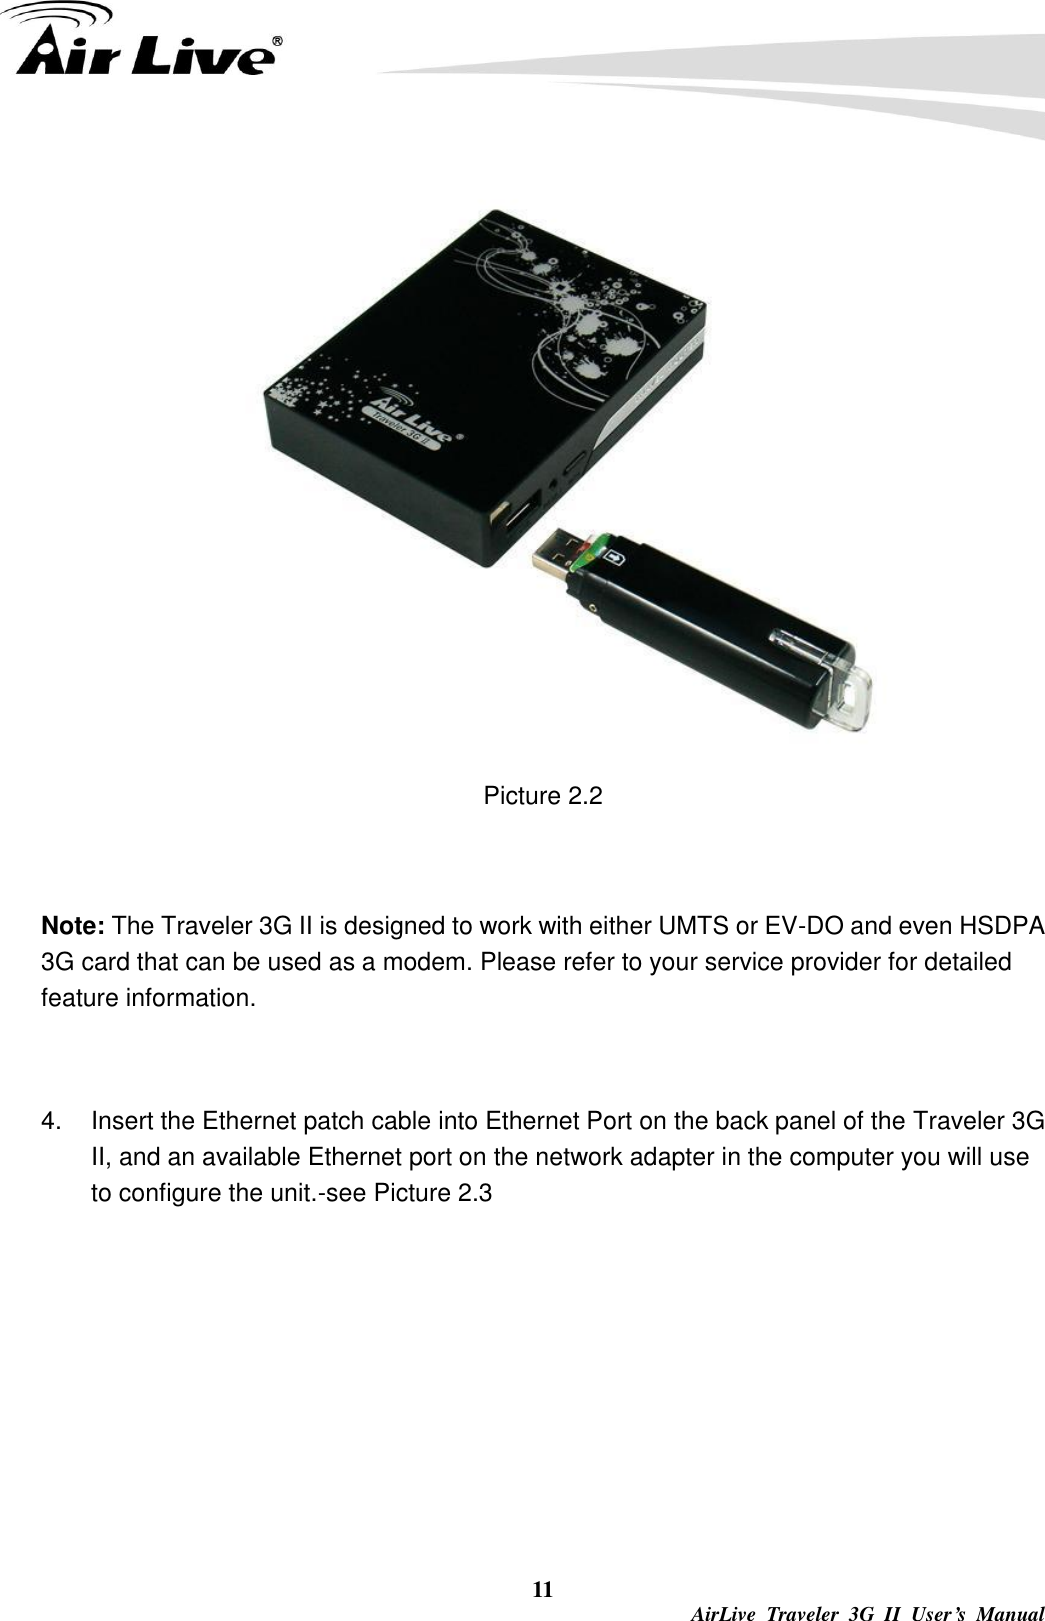  11 AirLive  Traveler  3G  II  User’s  Manual  Picture 2.2  Note: The Traveler 3G II is designed to work with either UMTS or EV-DO and even HSDPA 3G card that can be used as a modem. Please refer to your service provider for detailed feature information.    4.  Insert the Ethernet patch cable into Ethernet Port on the back panel of the Traveler 3G II, and an available Ethernet port on the network adapter in the computer you will use to configure the unit.-see Picture 2.3 